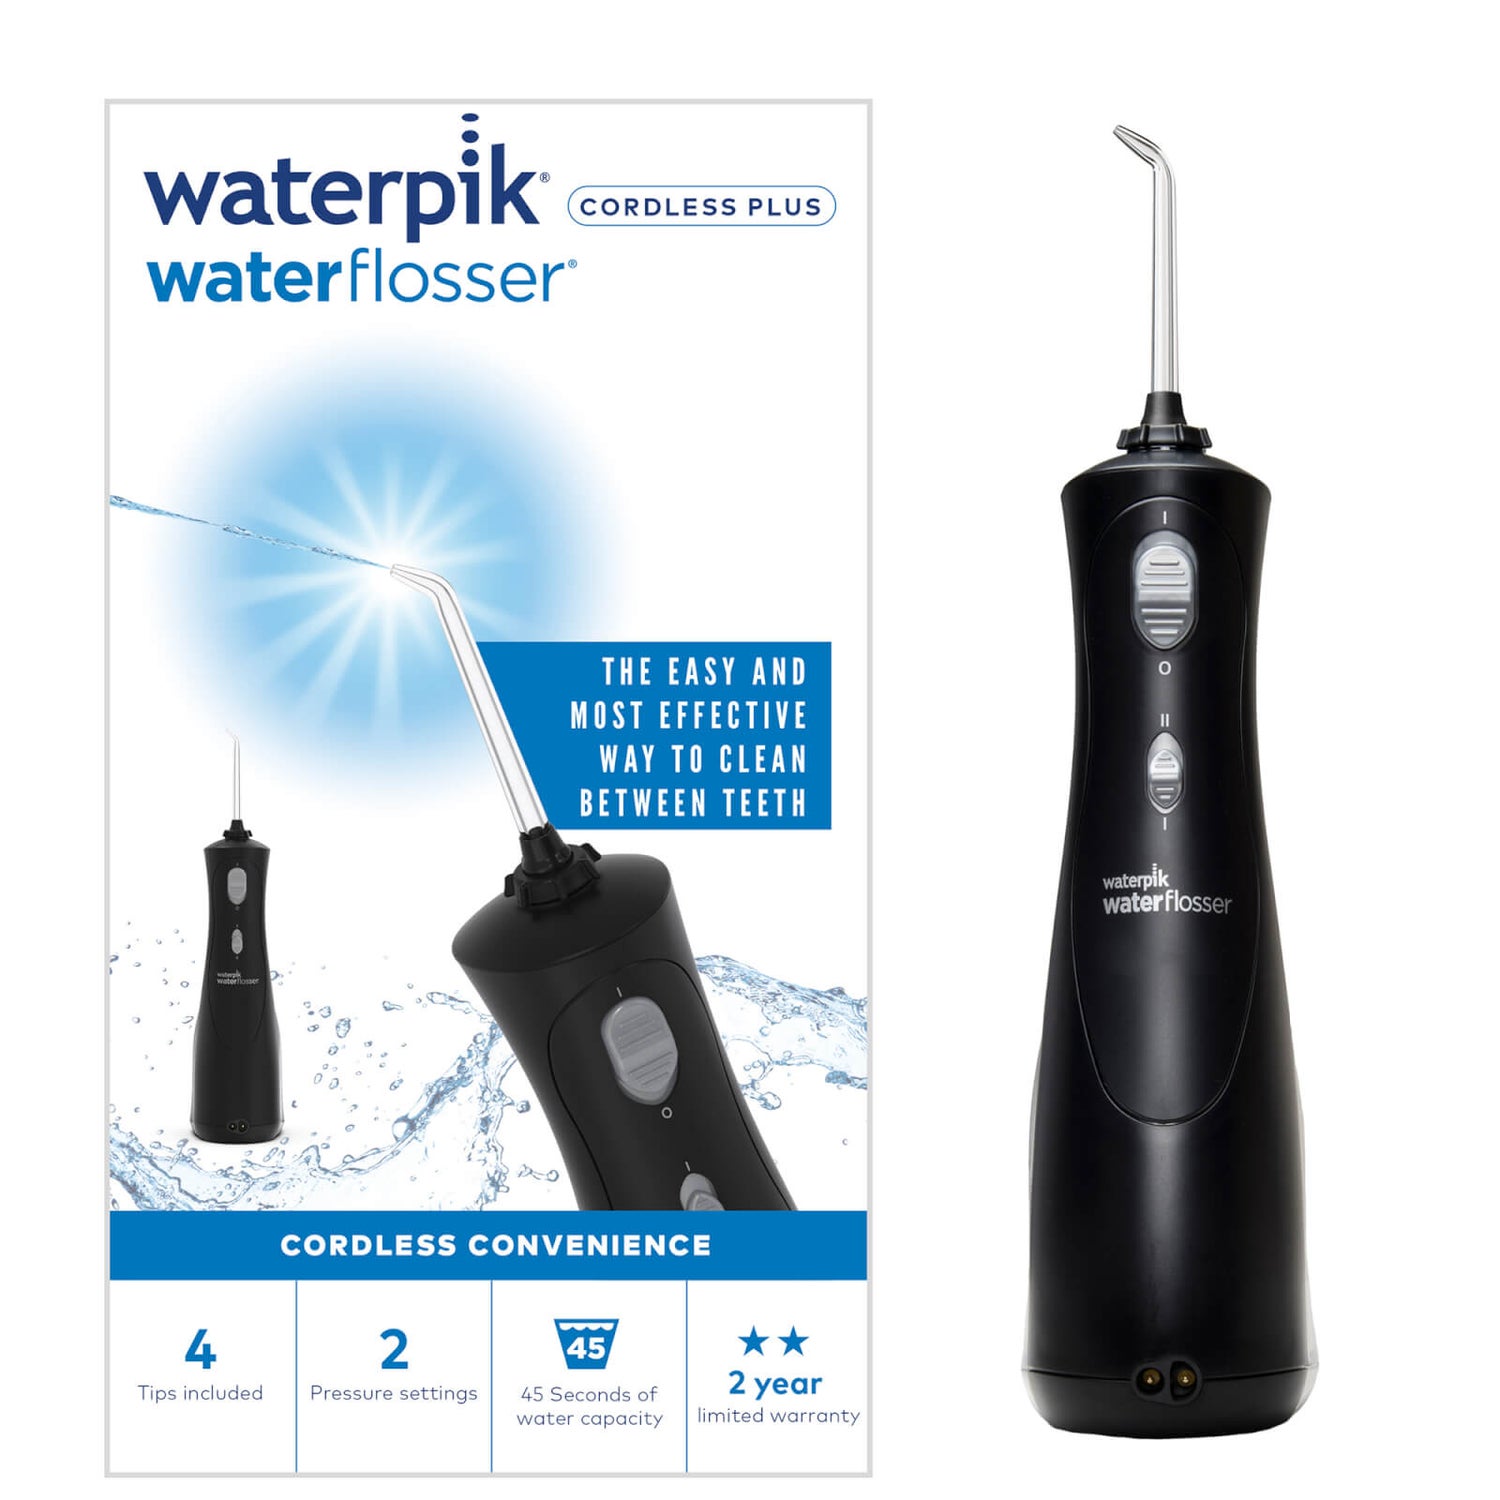 Waterpik (WP-462UK) Cordless Plus Dental Plaque Removal Water Flosser Tool with Rechargeable Battery - Black